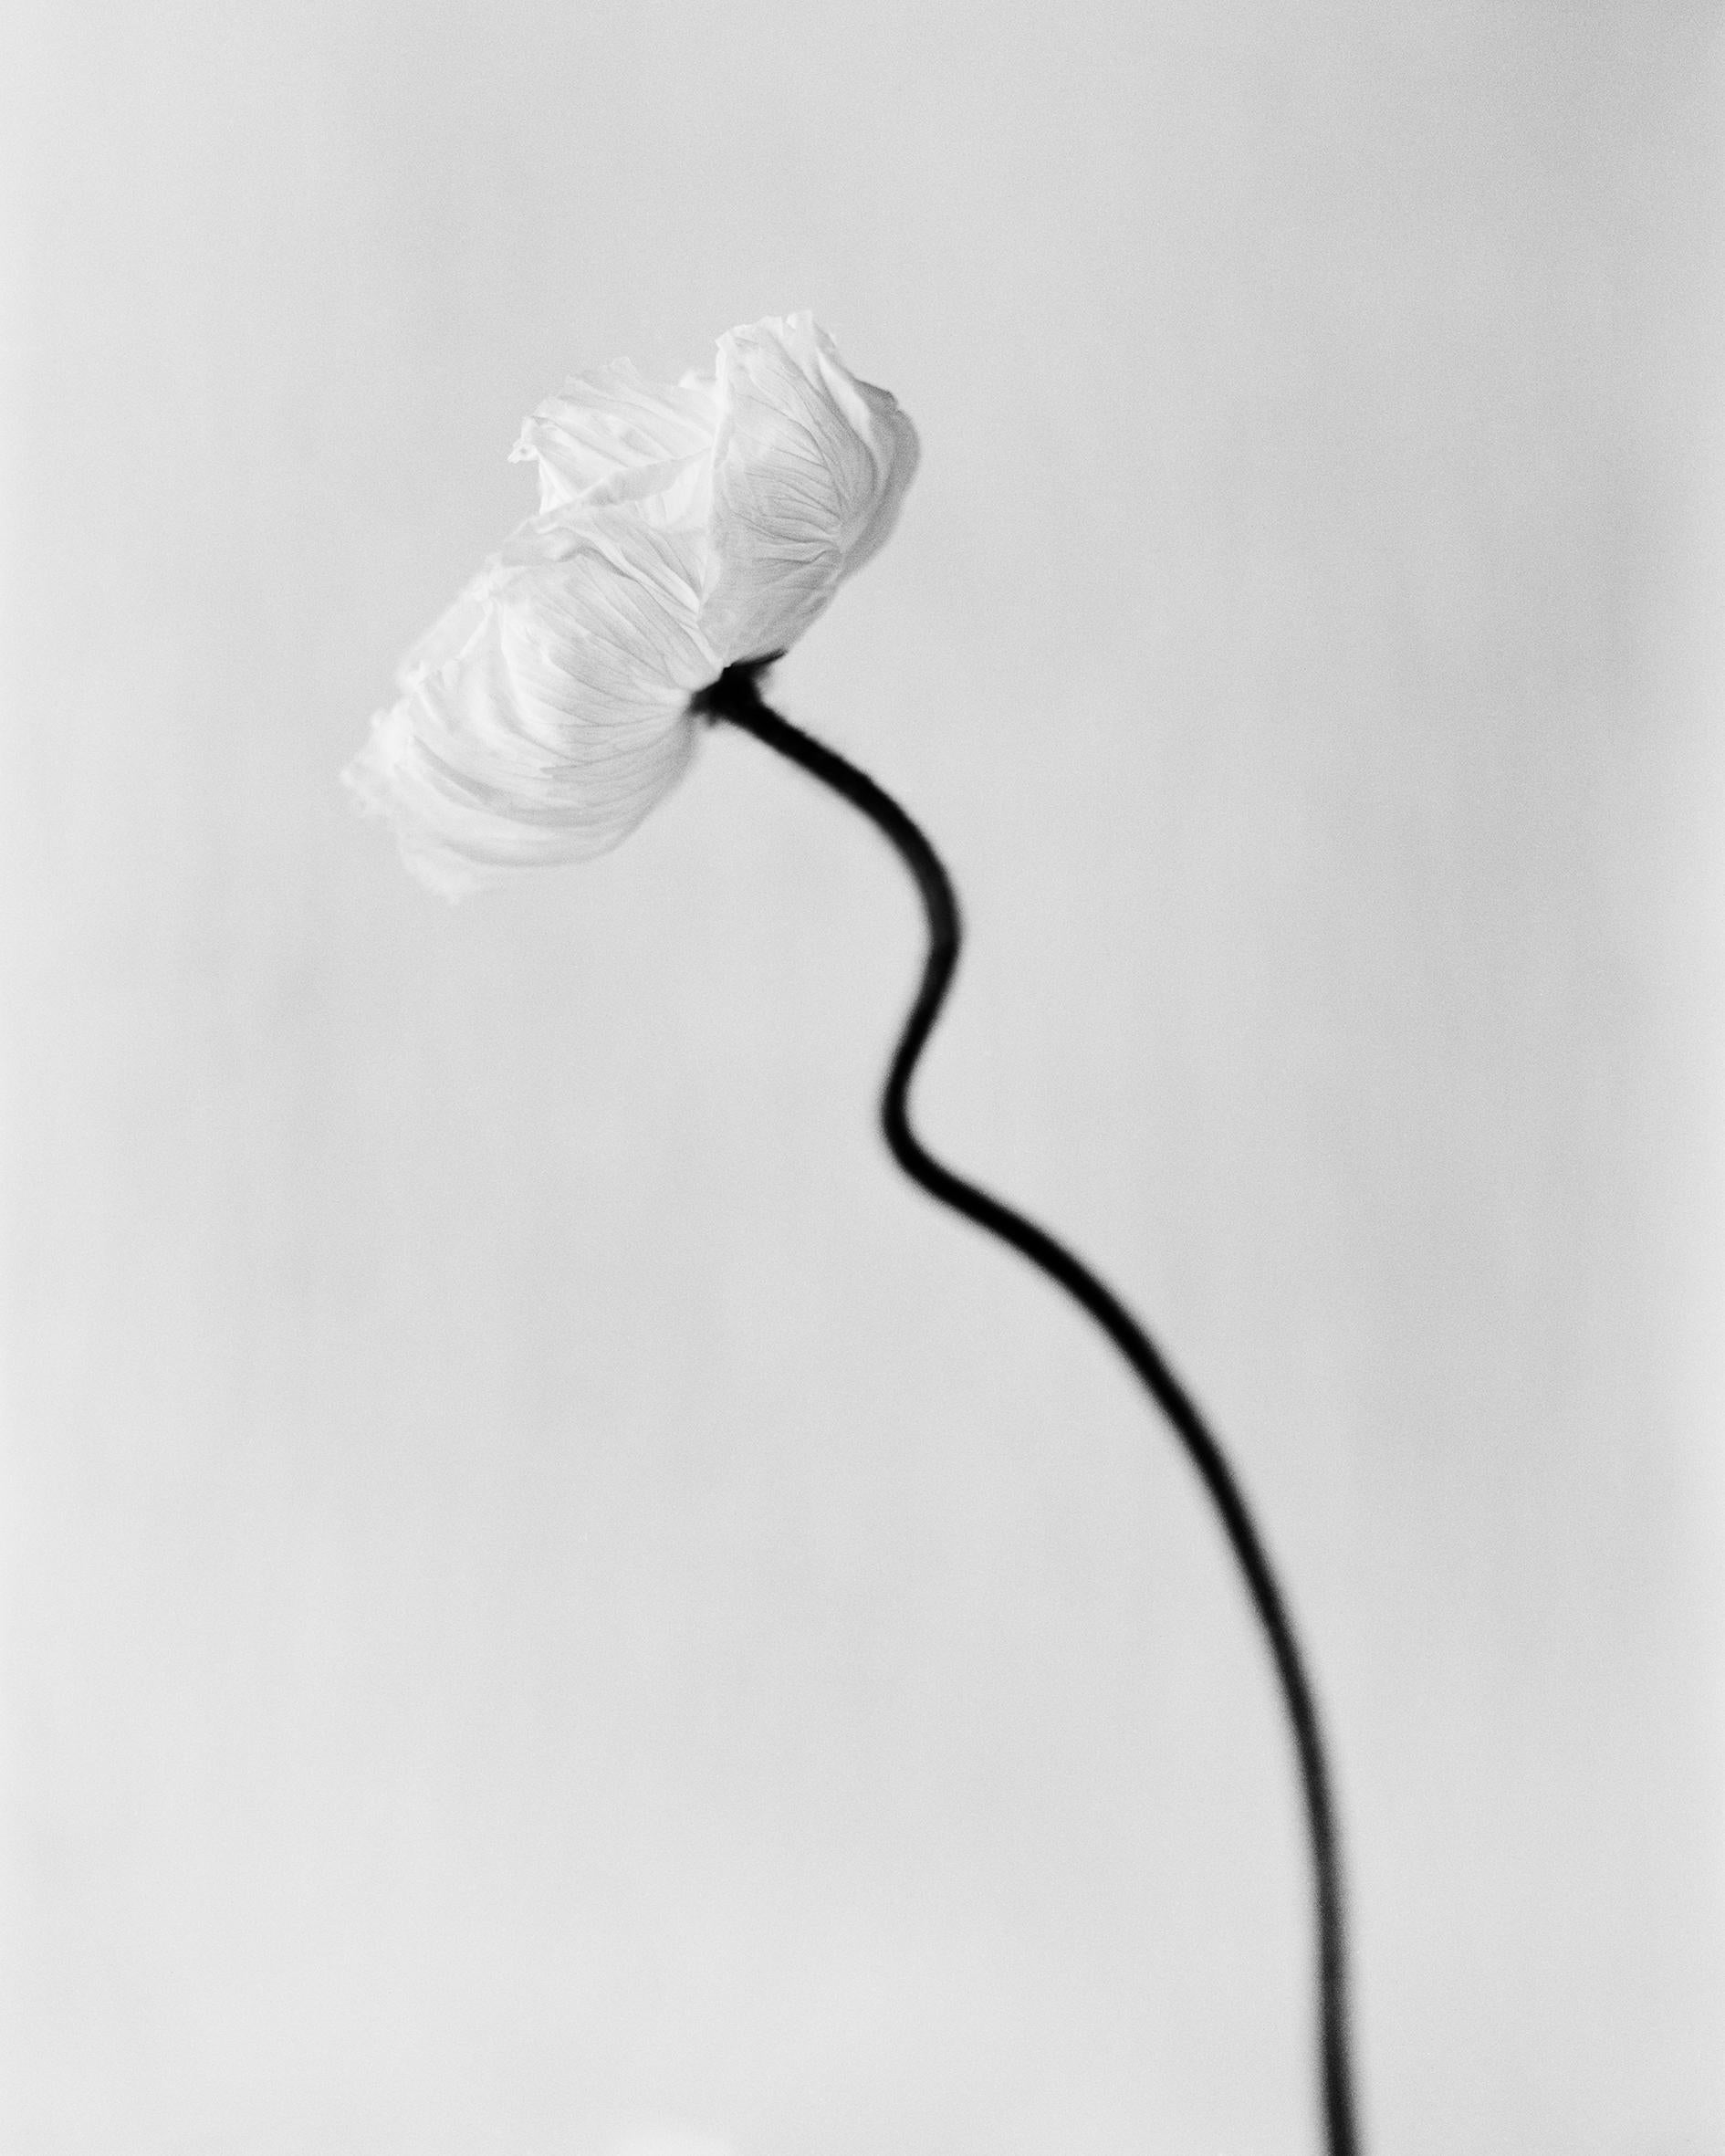 Ugne Pouwell Still-Life Photograph - Poppy bloom - Black and White analogue floral photography, Limited edition of 20